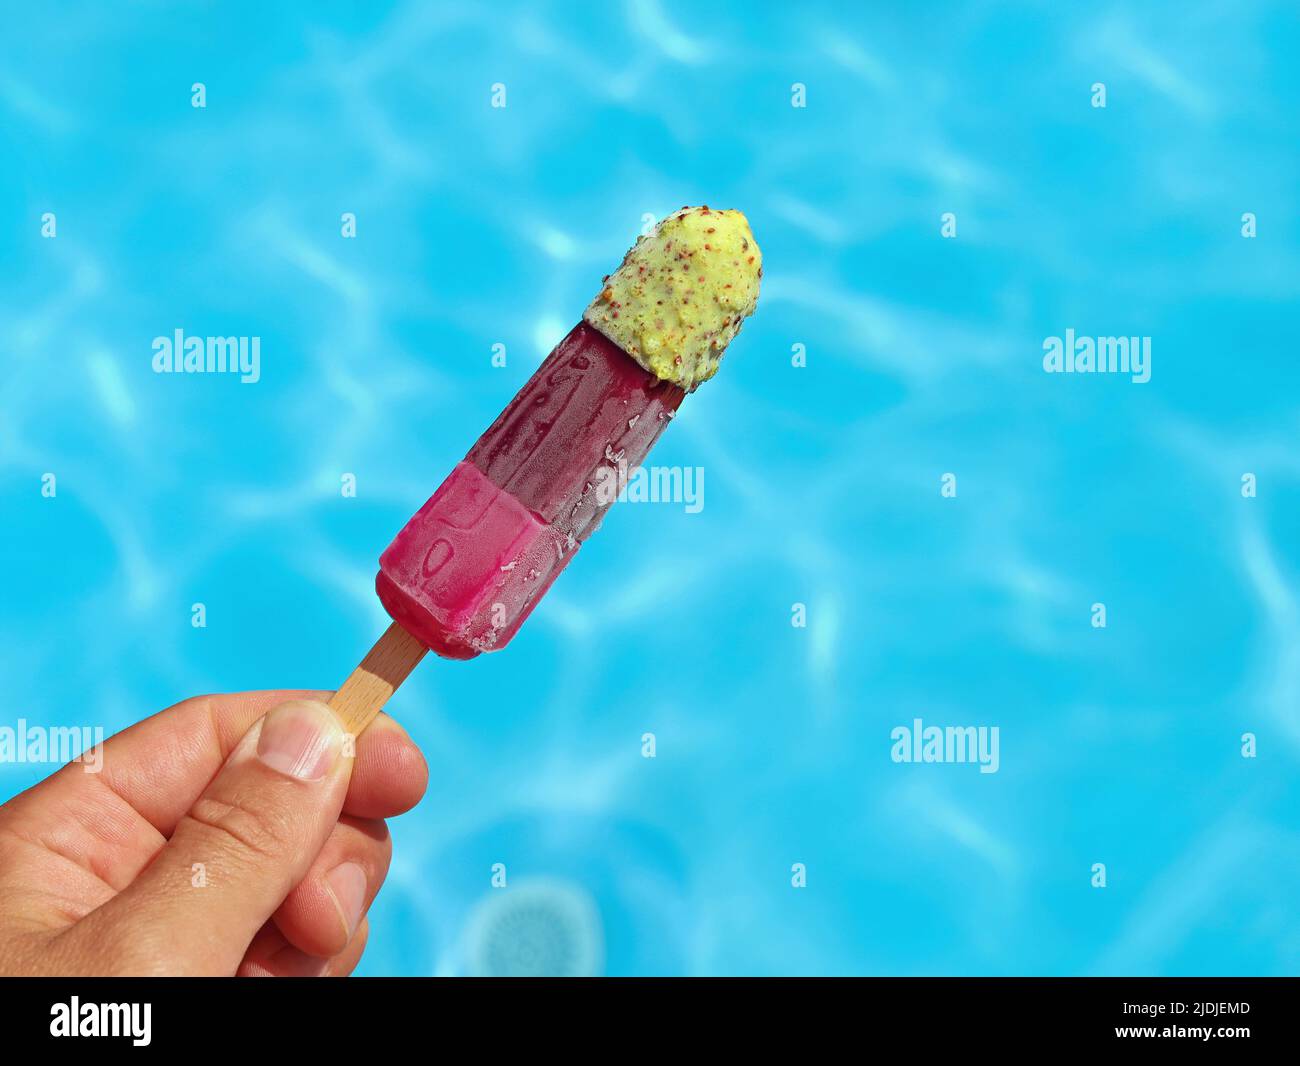 Hand holding fruity colorful popsicles or water ice in front of a blue pool surface, help against summer heat concept image Stock Photo